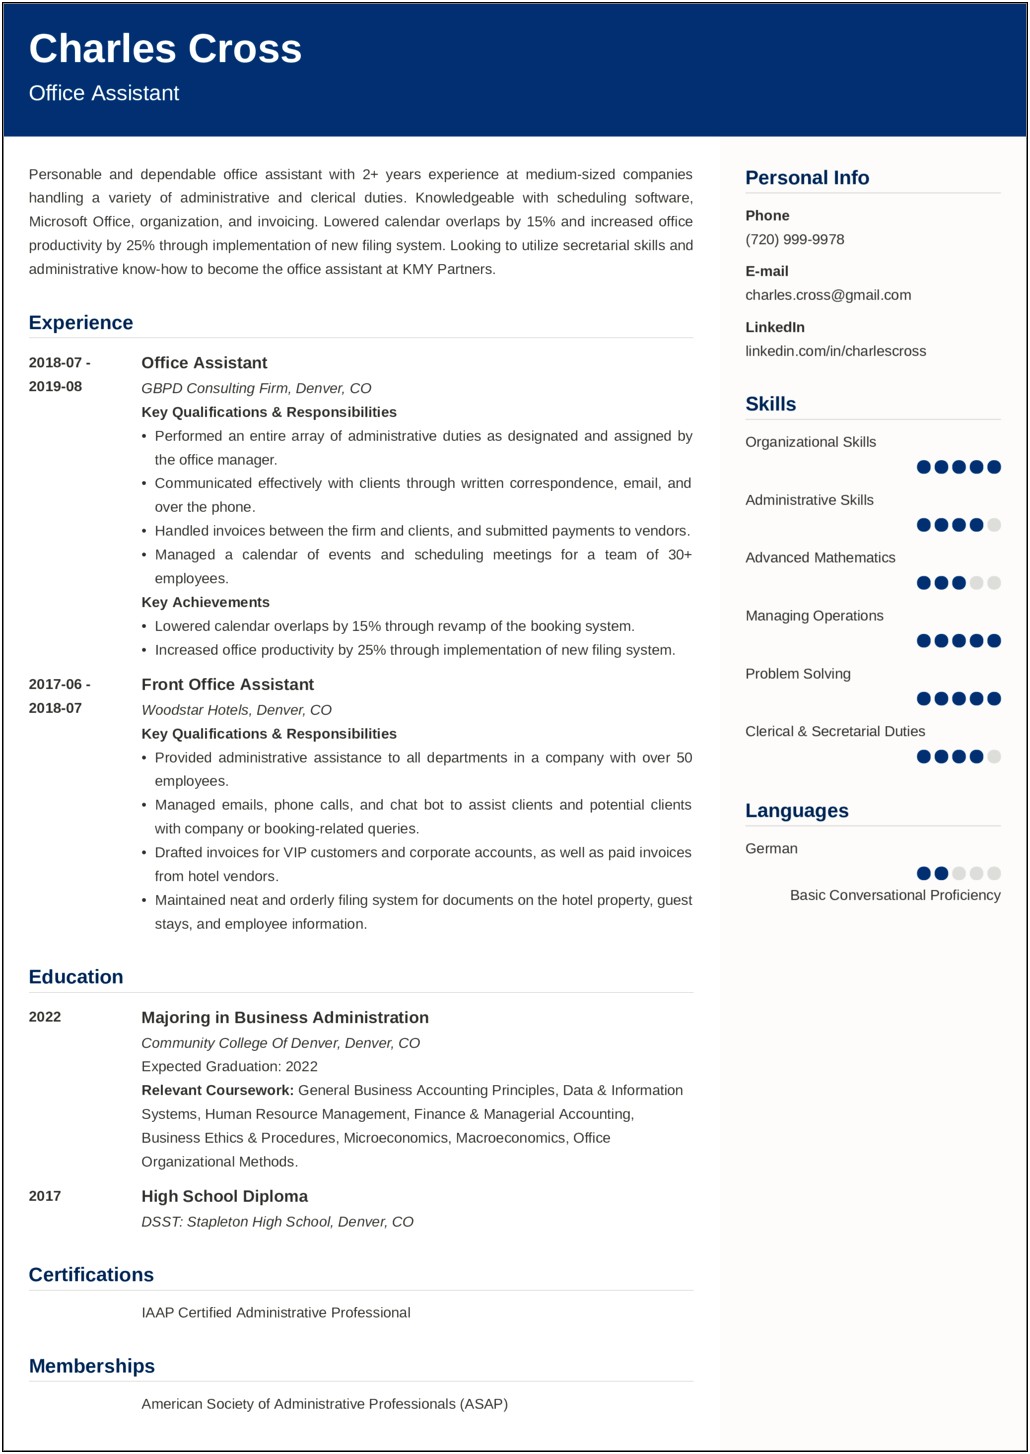 Career Summary For Administrative Assistant Resume